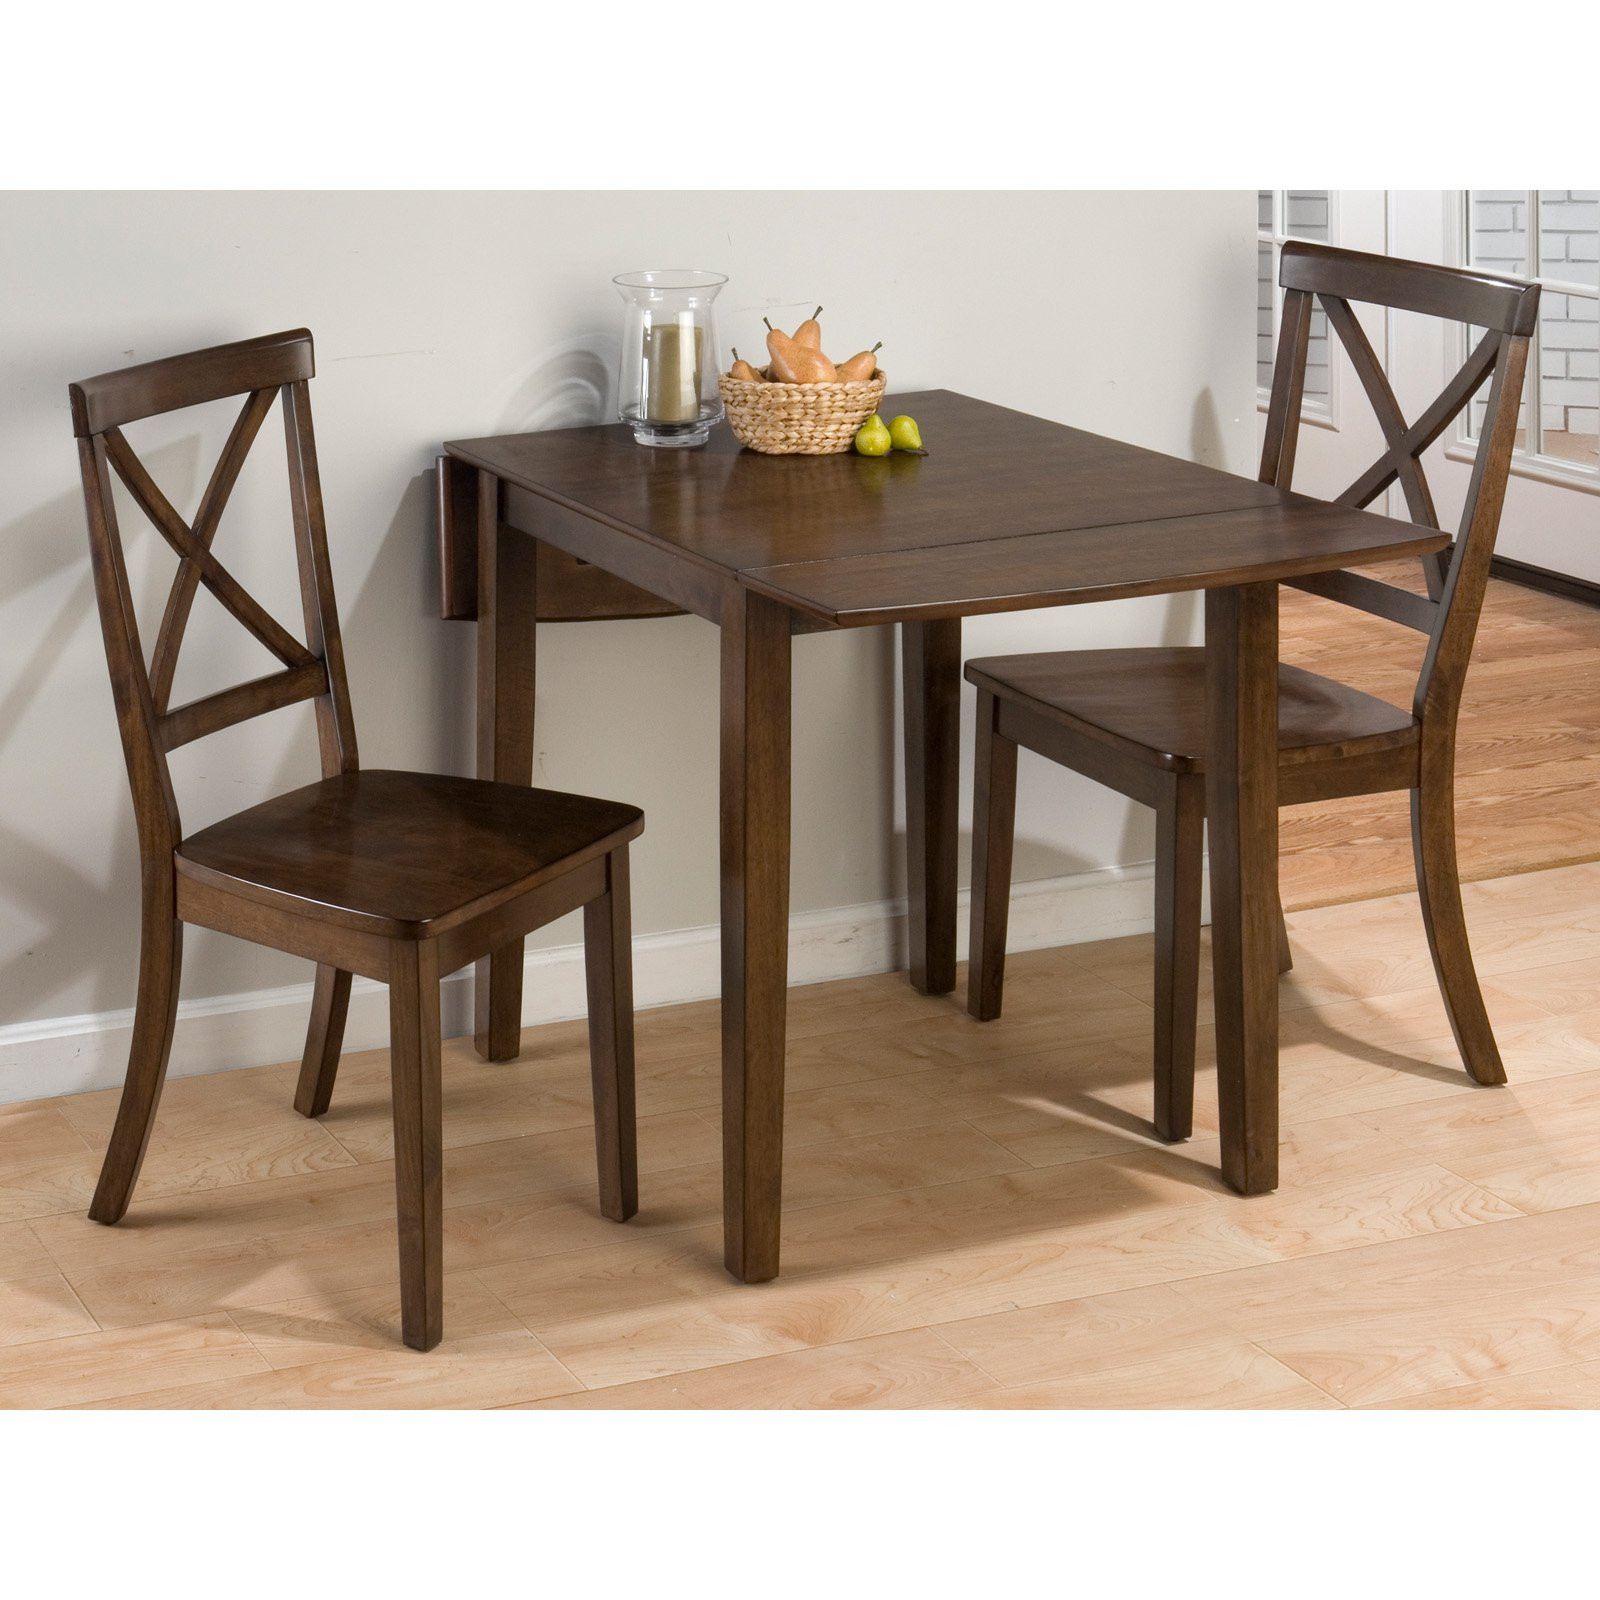 Small Kitchen Dinette Set
 Kitchen Perfect For Kitchen And Small Area With 3 Piece